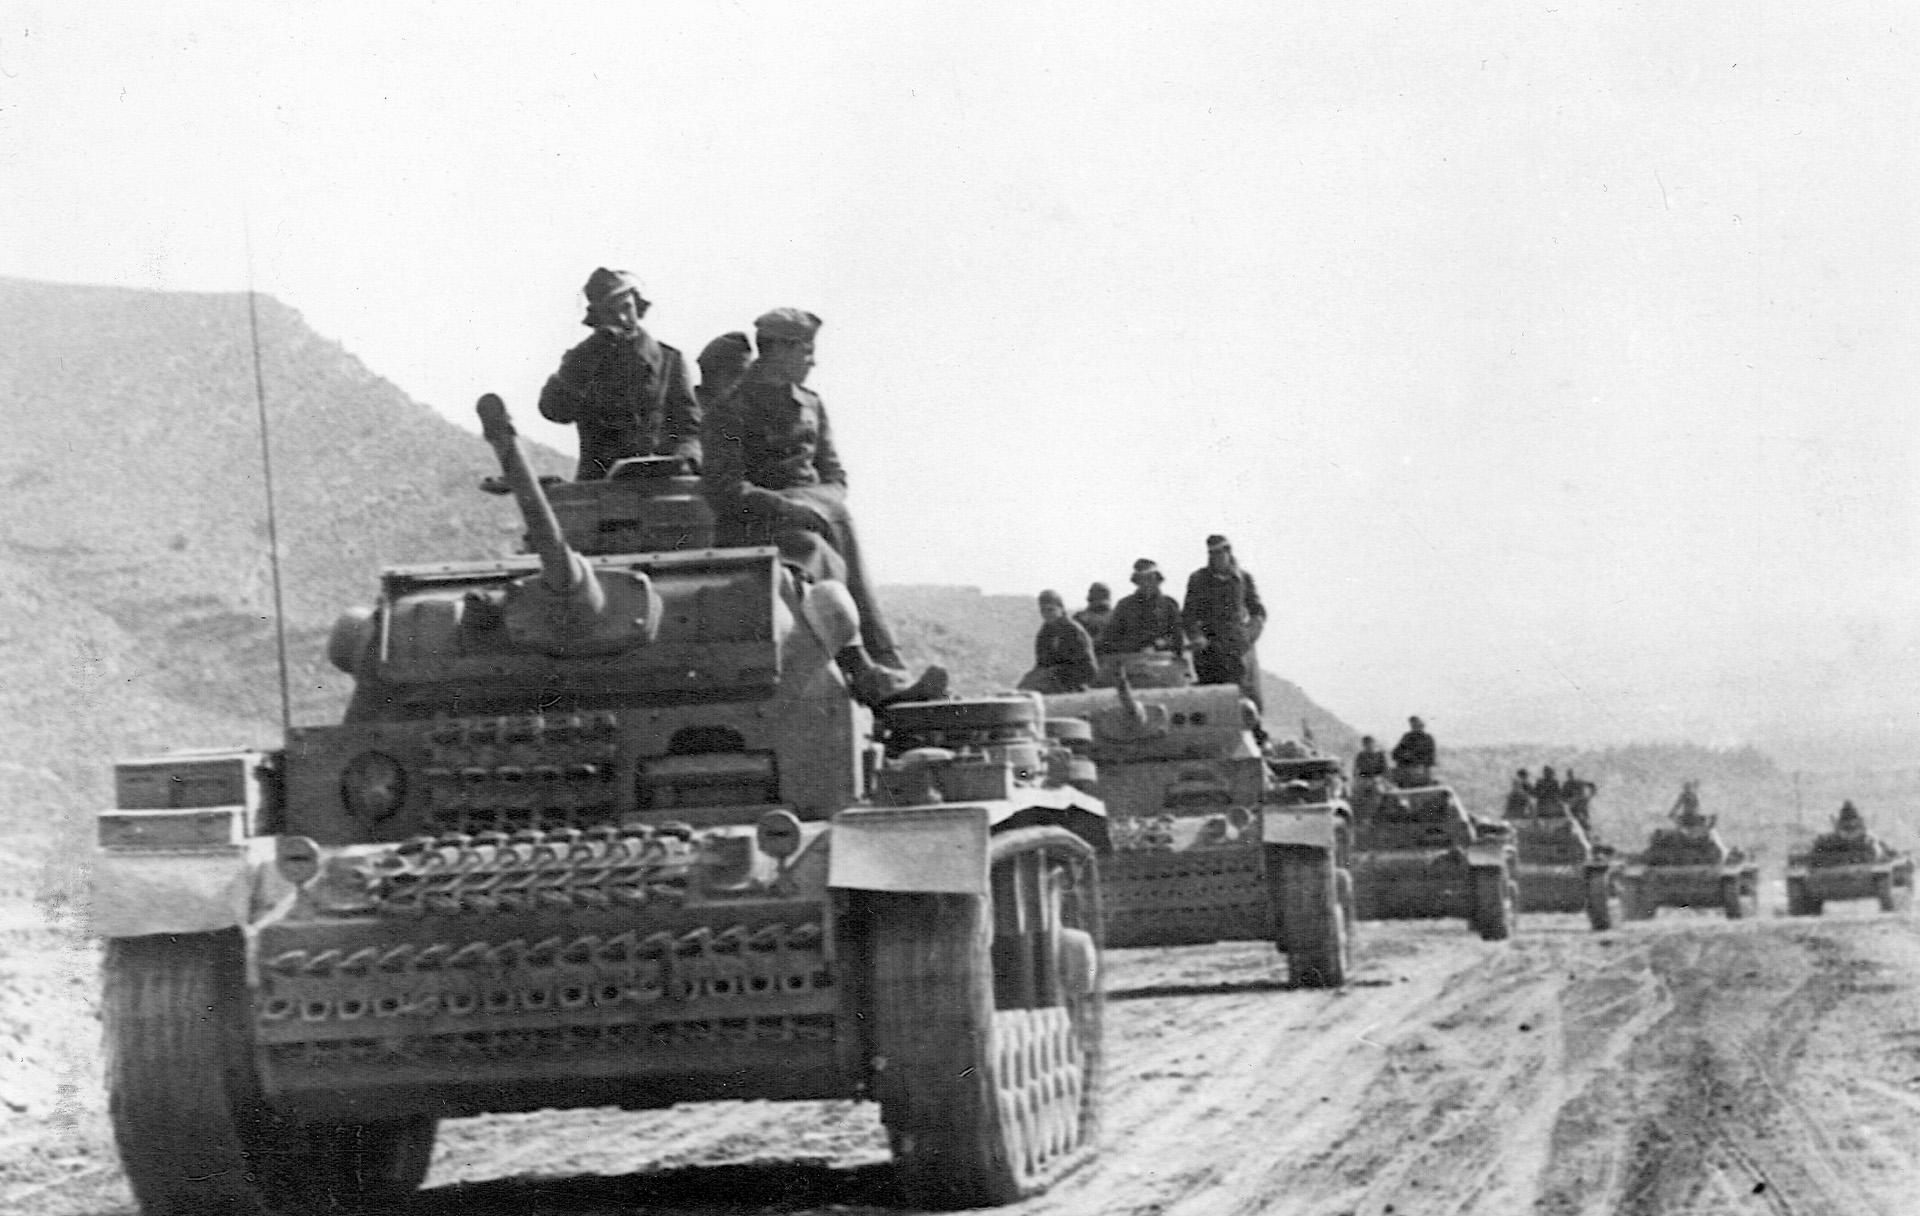 A column of German Mark III tanks rolls along a desert road. Hitler initially sent Wehrmacht units to North Africa to bolster his faltering ally, fascist Italy.